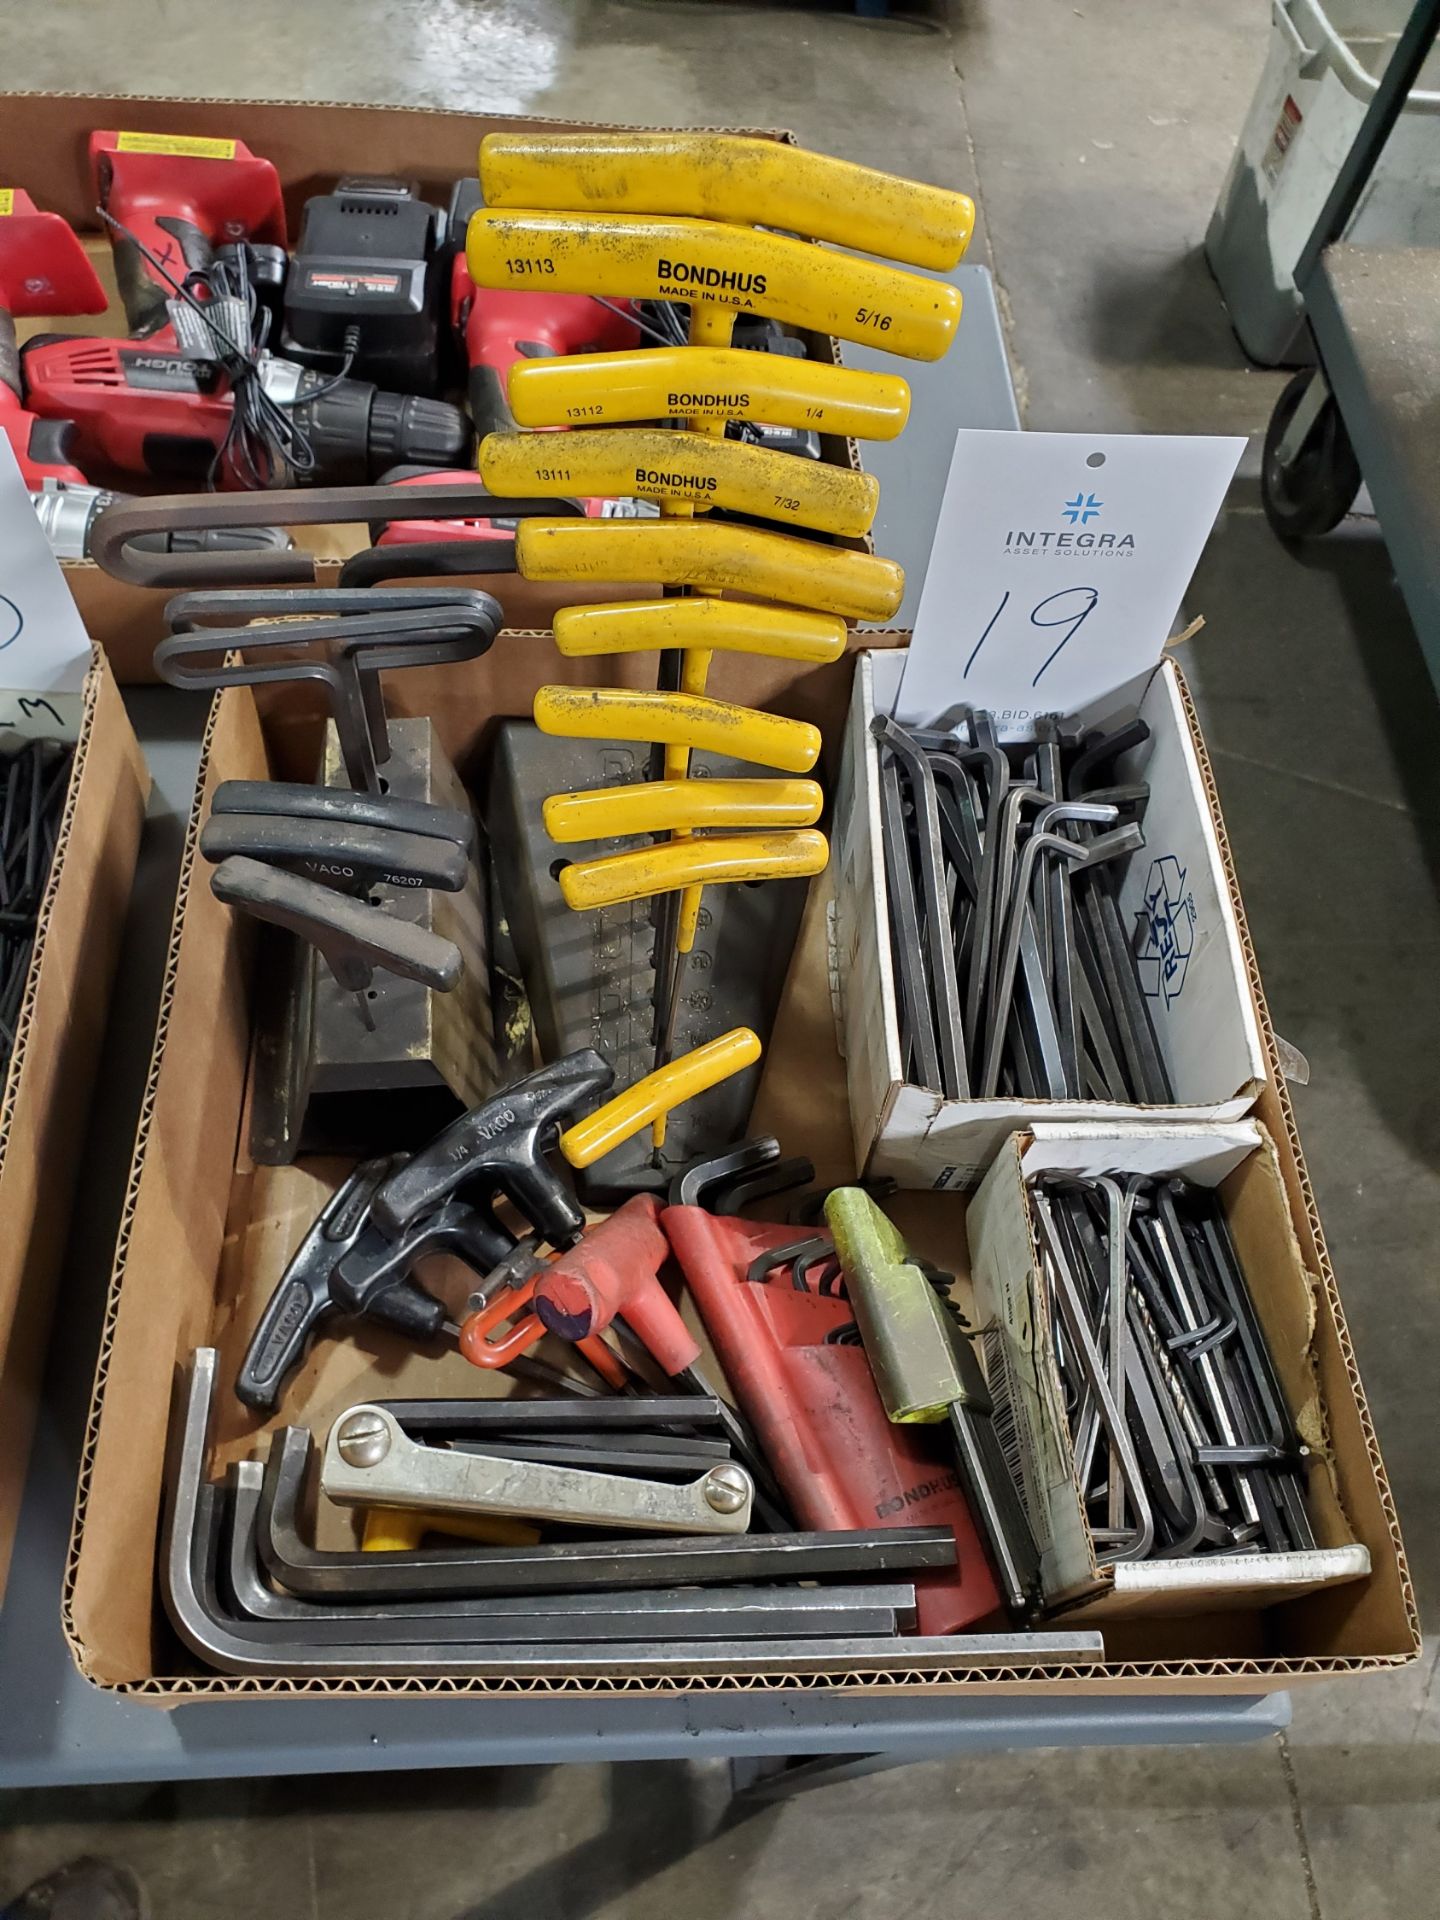 Lot of Assorted Hex Wrenches